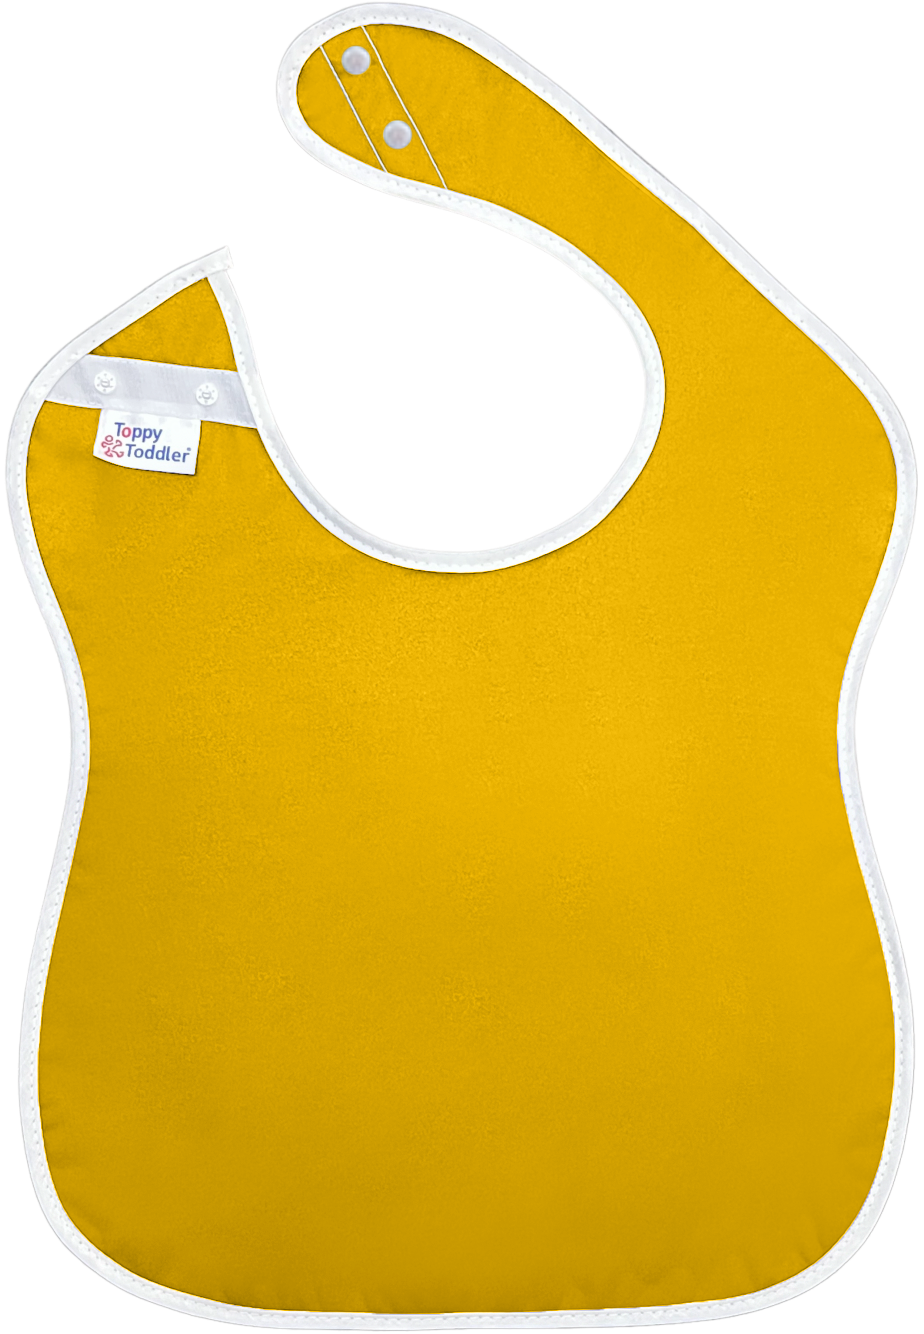 Small (10x15") Waterproof Toddler Bibs with Snap Buttons - Goldenrod (Yellow)